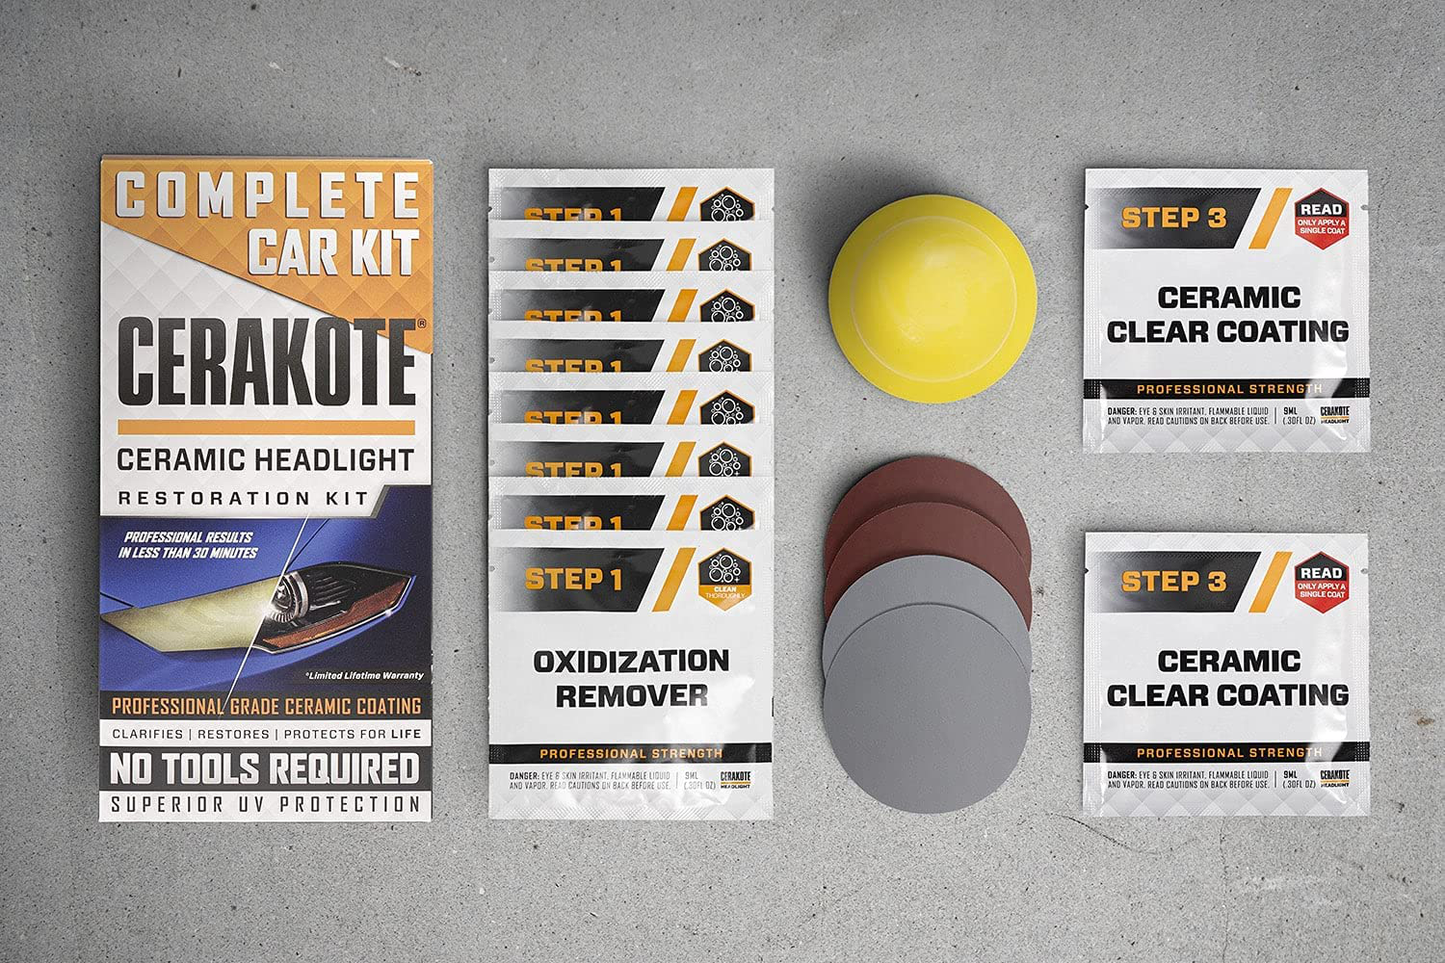 CERAKOTE Ceramic Headlight Restoration Kit – Guaranteed To Last As Long As You Own Your Vehicle – Brings Headlights back to Like New Condition - 3 Easy Steps - No Power Tools Required